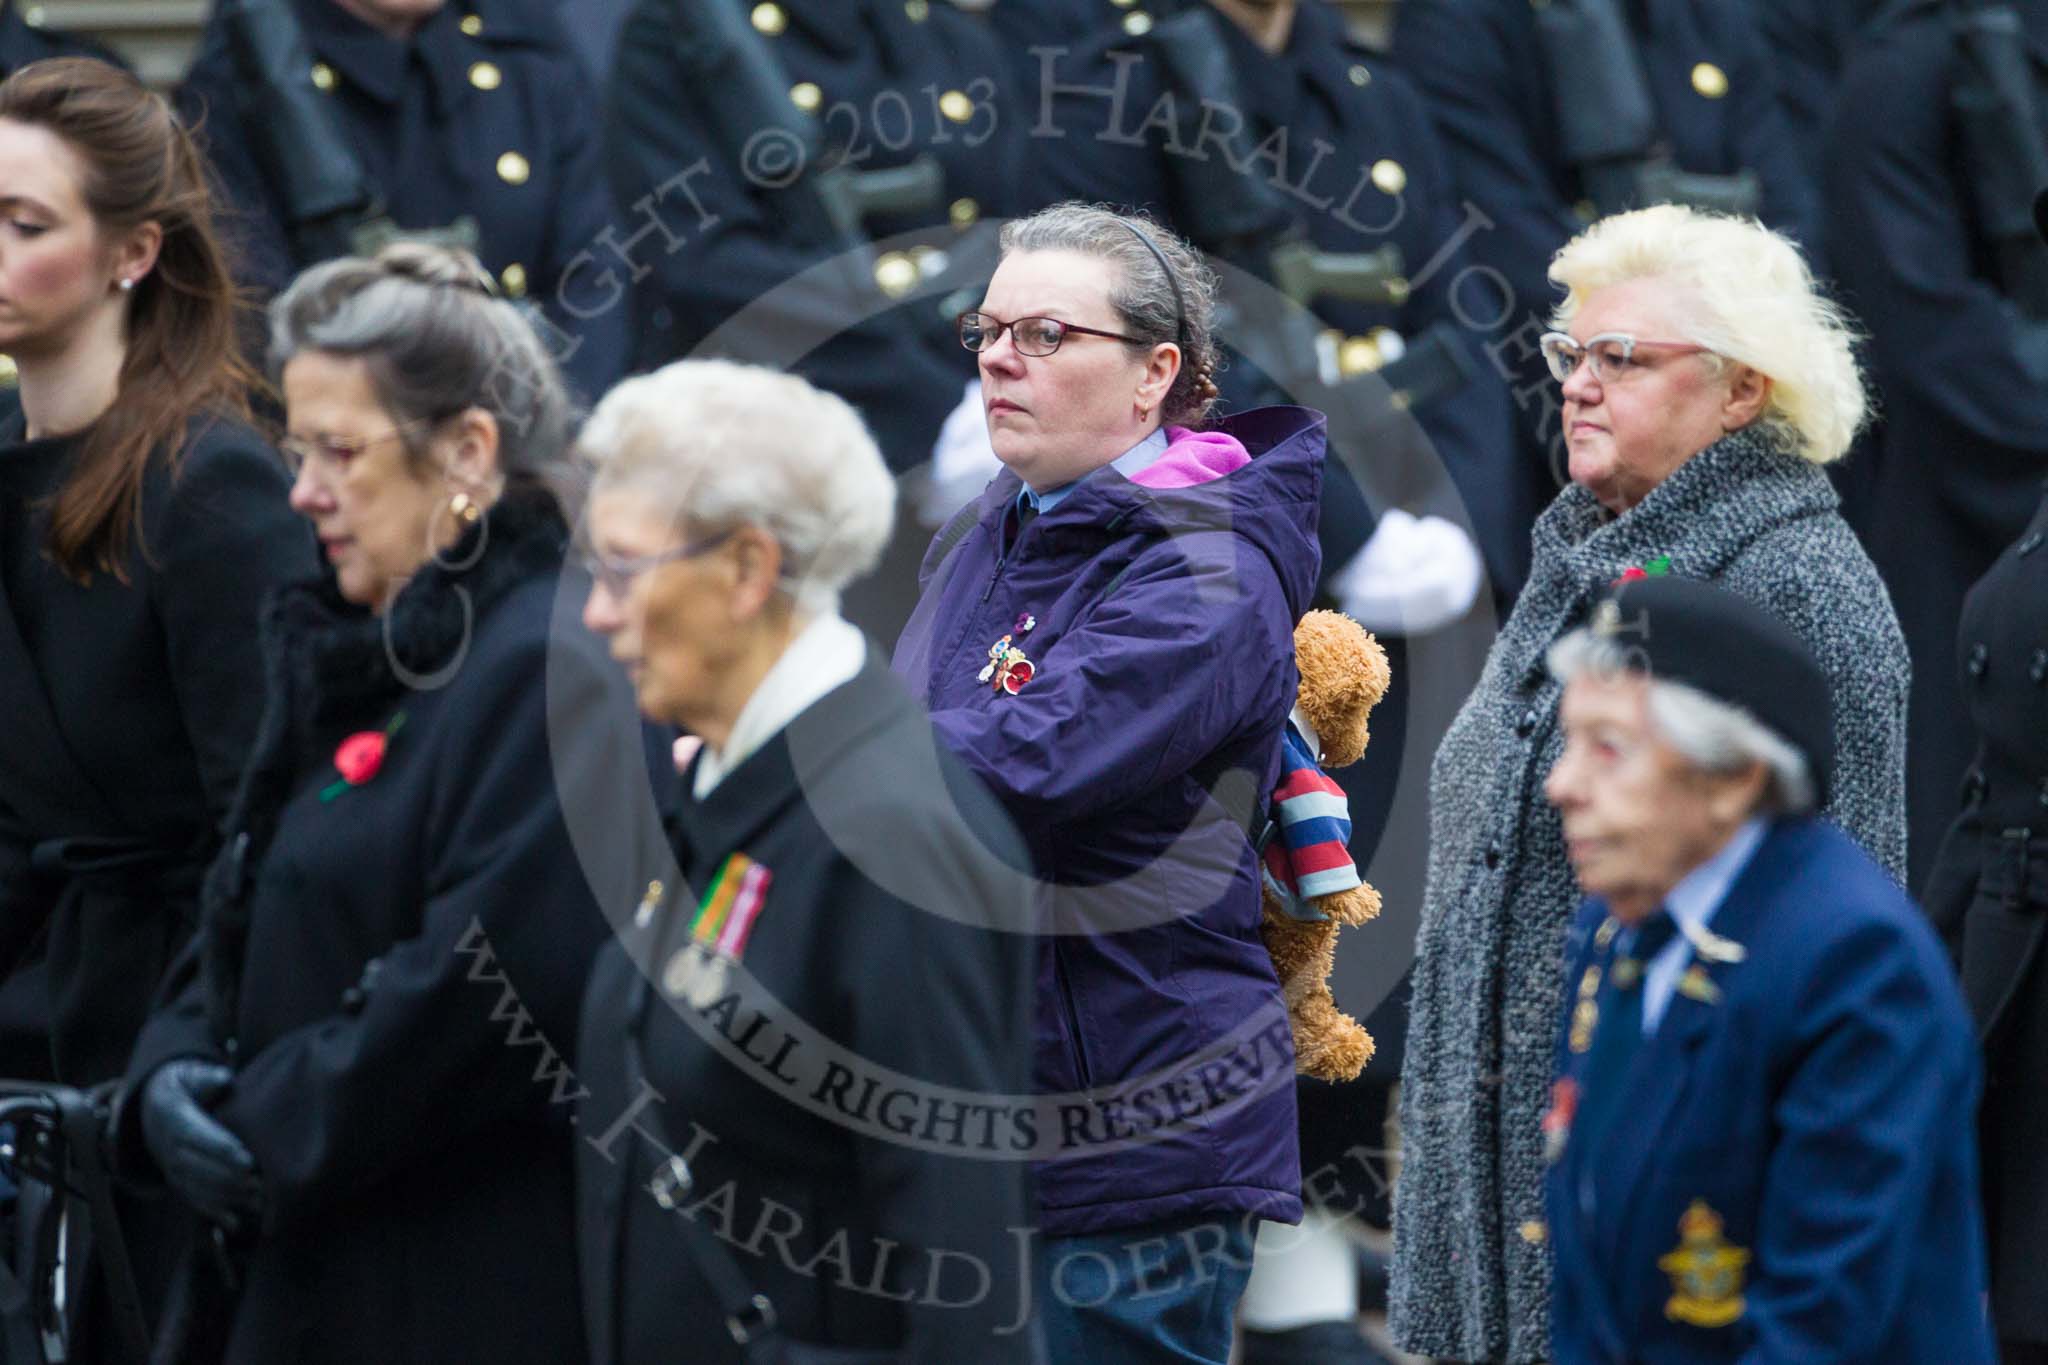 Remembrance Sunday at the Cenotaph 2015: Group C19, WAAF/WRAF/RAF(W).
Cenotaph, Whitehall, London SW1,
London,
Greater London,
United Kingdom,
on 08 November 2015 at 11:50, image #538